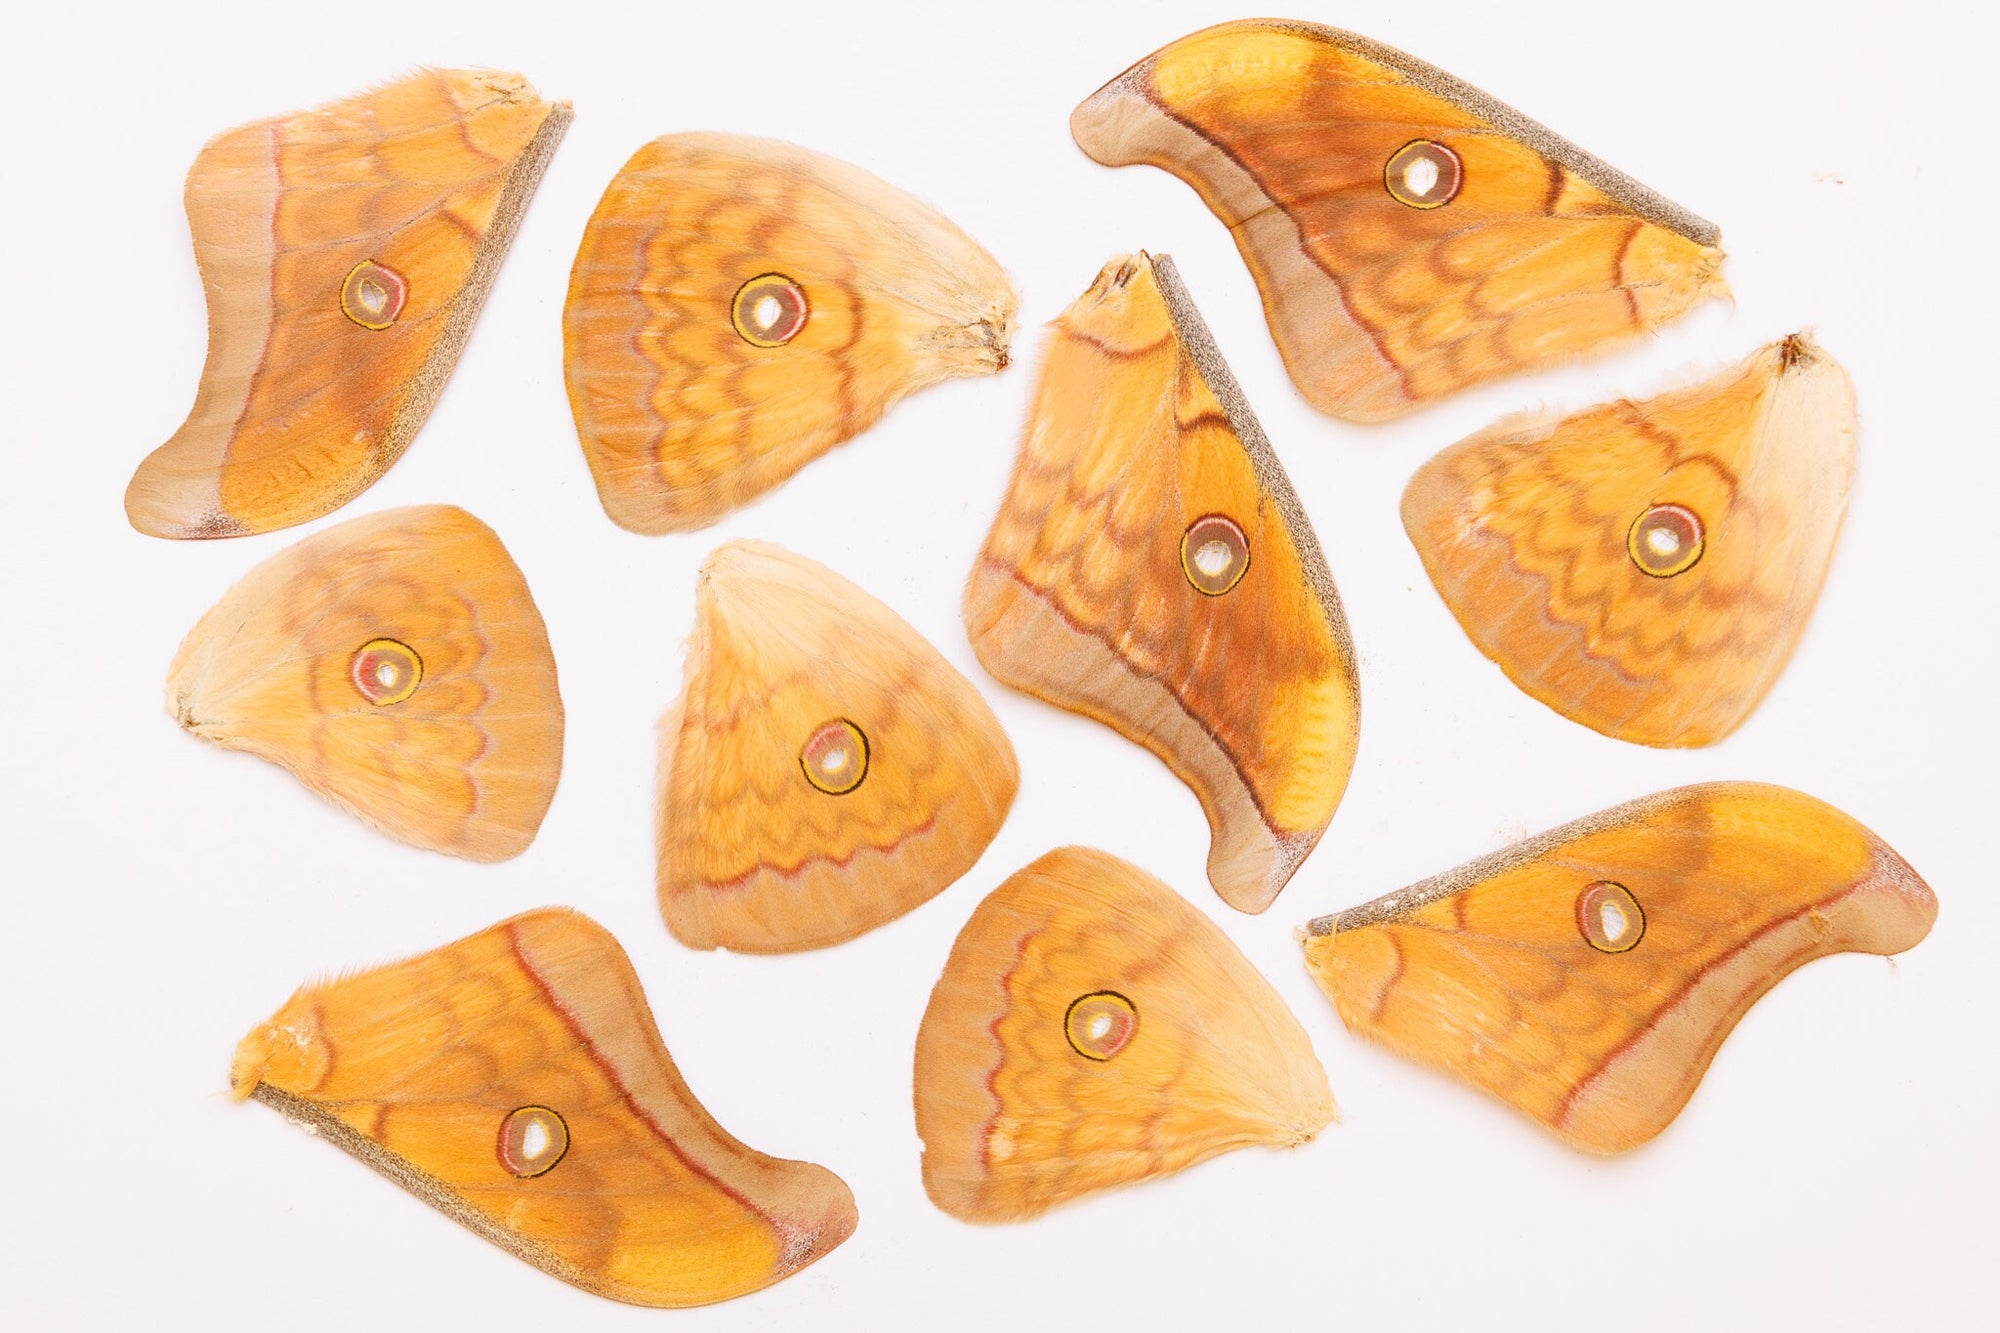 10 Silk Moth Wings (Antheraea frithi) Real Insects for Artistic Creation